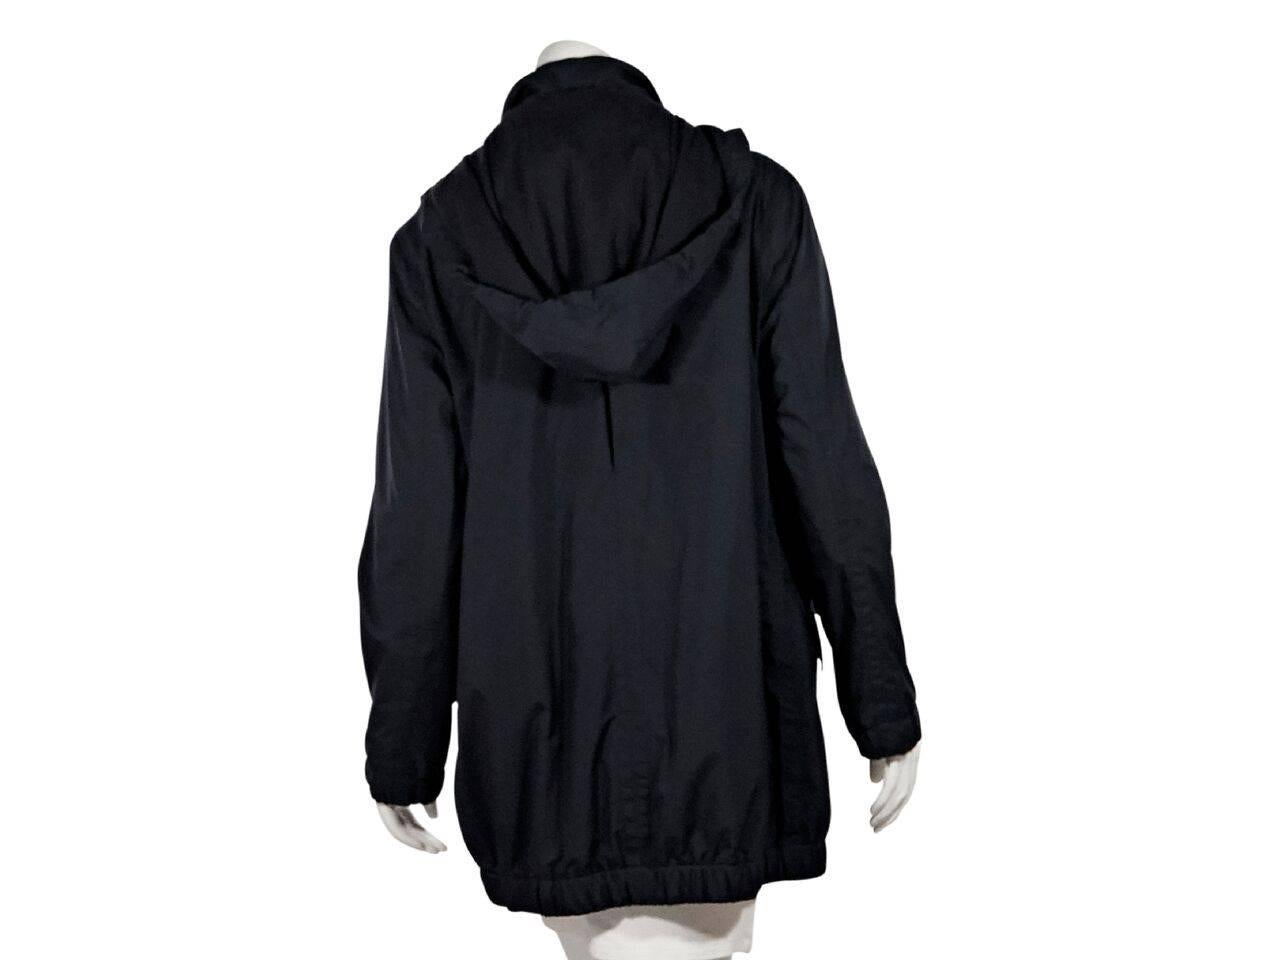 Product details:  Black cashmere-lined jacket by Loro Piana.  Stand collar.  Detachable hood.  Long sleeves.  Zip-front closure.  Waist flap pockets.  Elasticized hem. 
Condition: Pre-owned. Very good.
Est. Retail $ 1,395.00